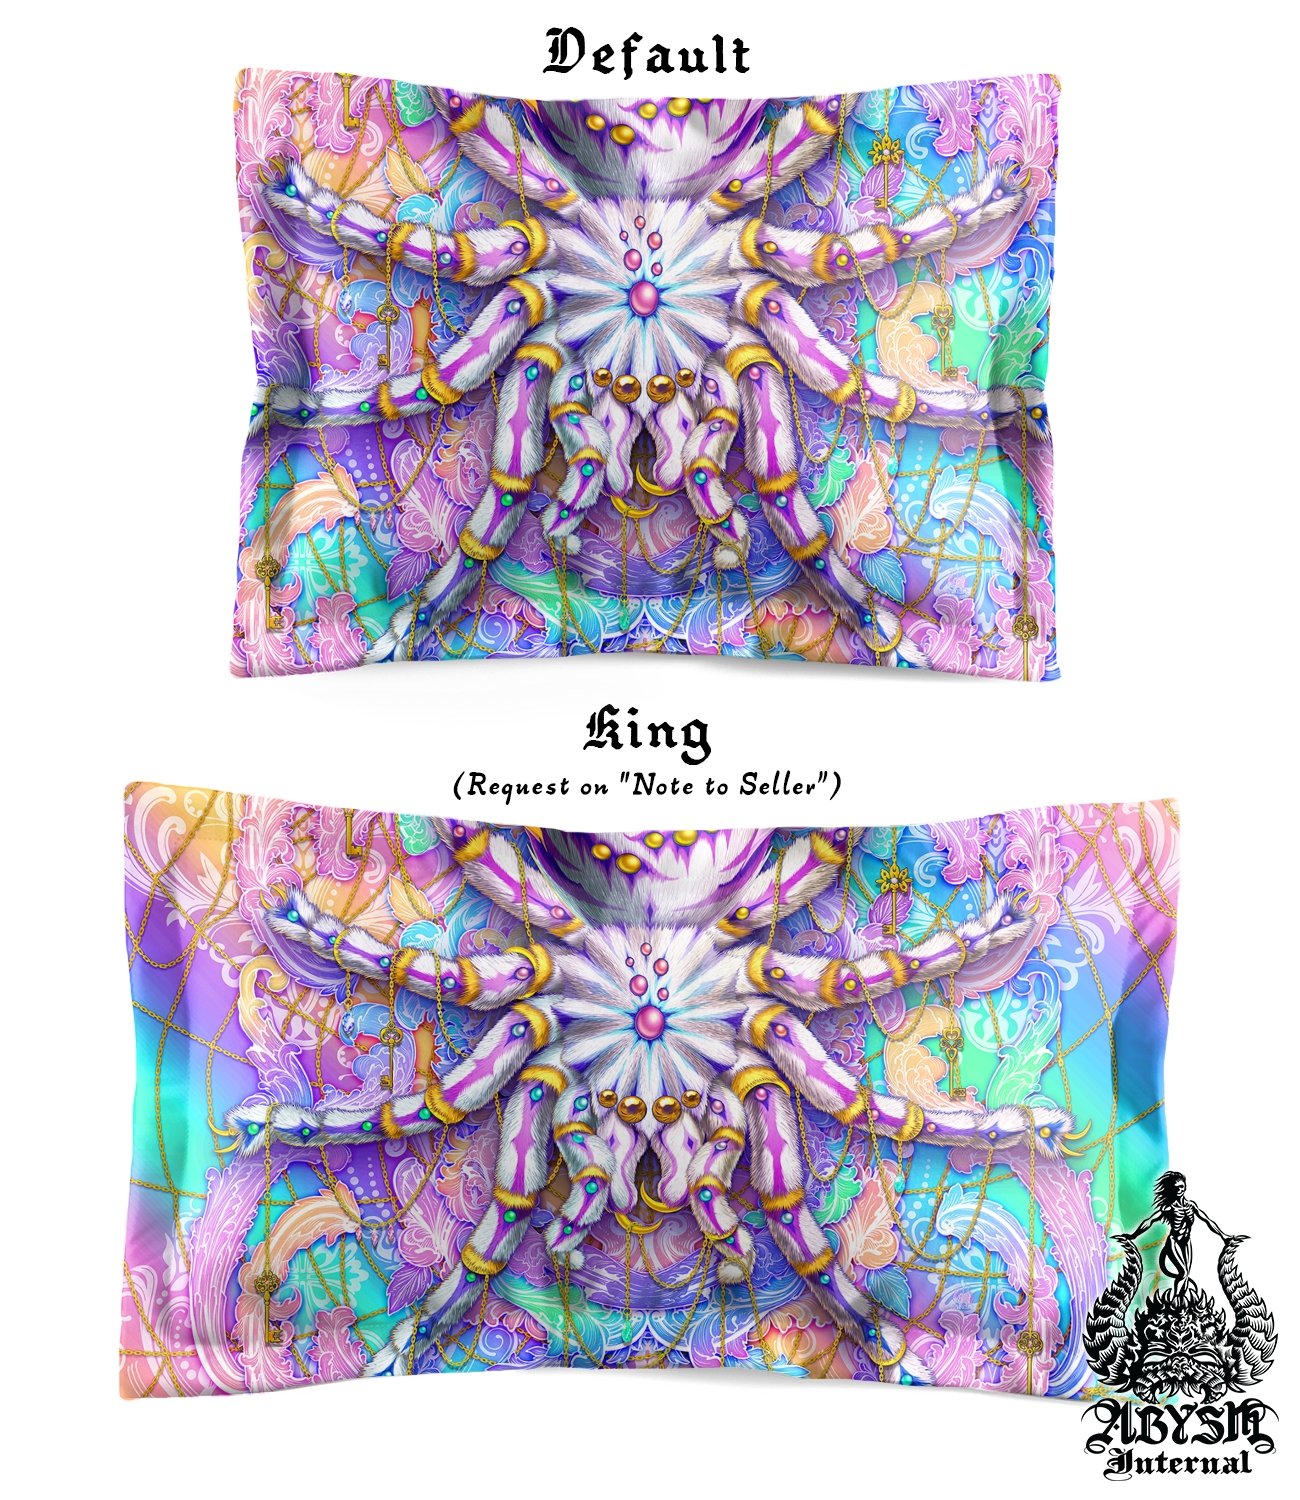 Aesthetic Bedding Set, Comforter and Duvet, Bed Cover and Bedroom Decor, King, Queen and Twin Size - Tarantula Spider, Holographic Pastel Style - Abysm Internal